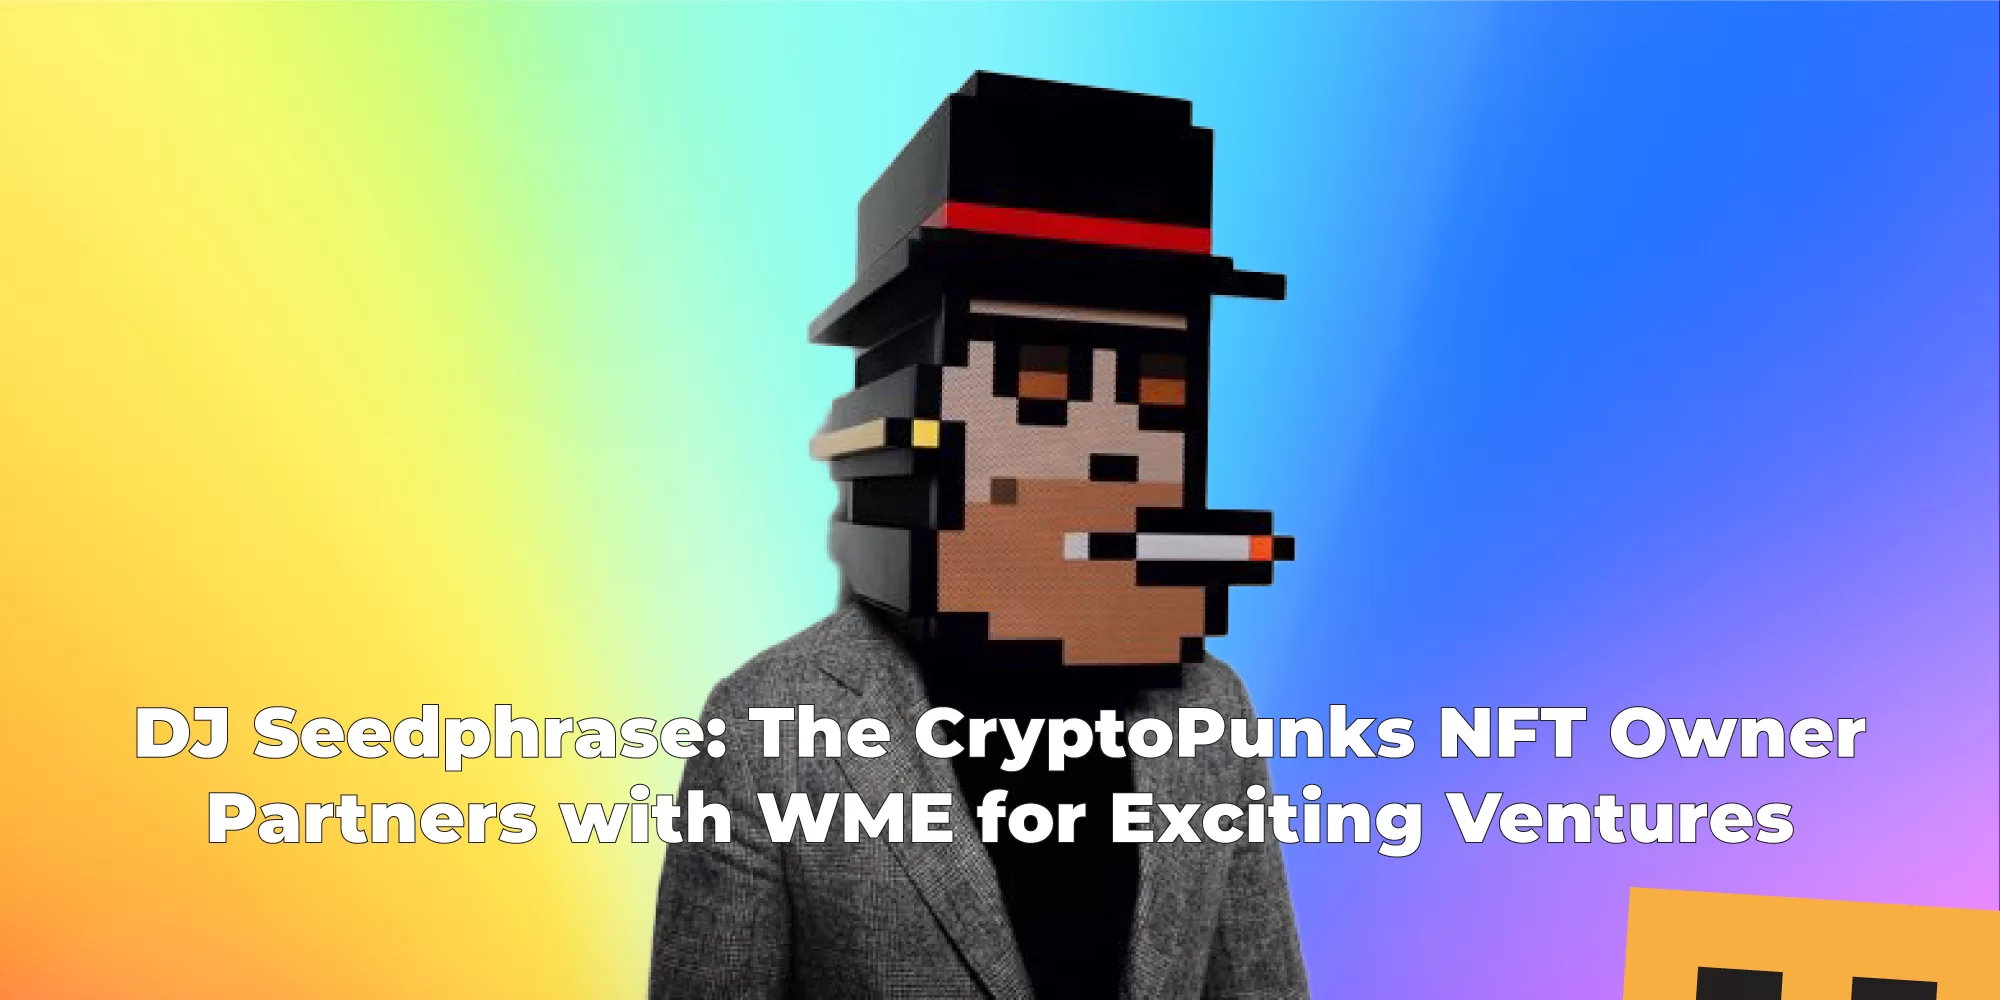 DJ Seedphrase: The CryptoPunks NFT Owner Partners with WME for Exciting Ventures